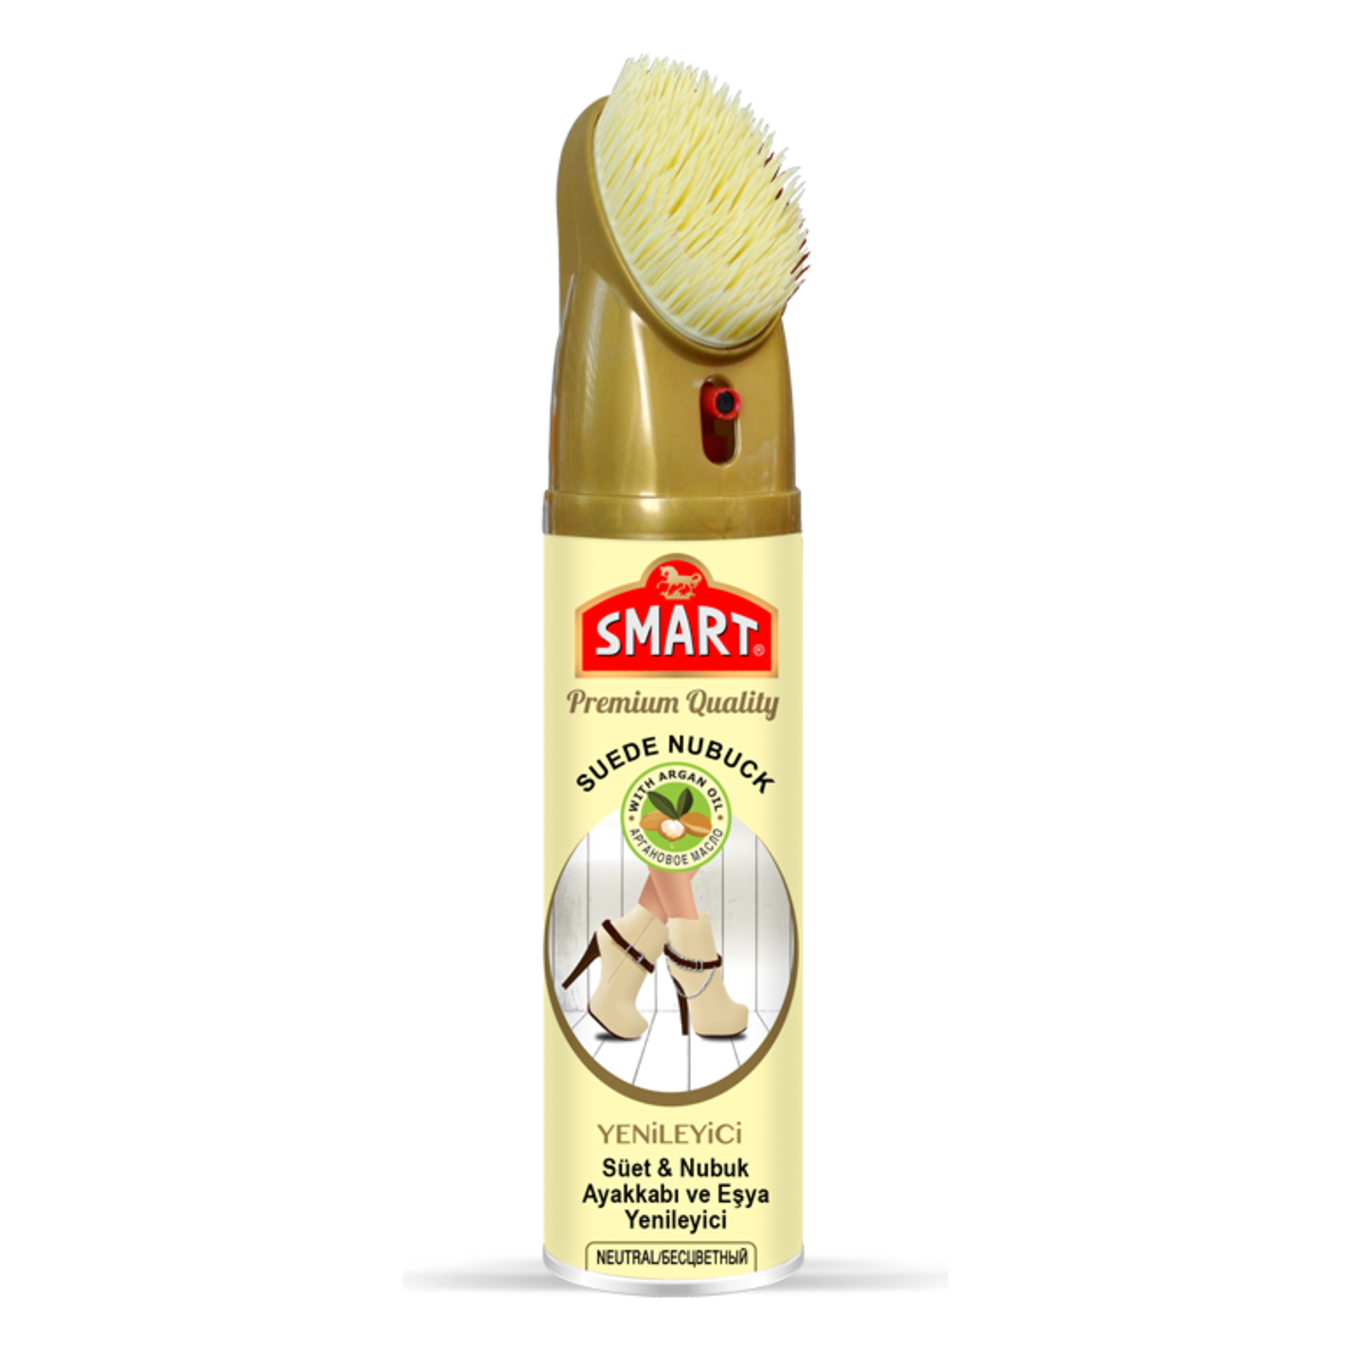 Smart spray for shoes restoring suede and nubuck neutral 250ml